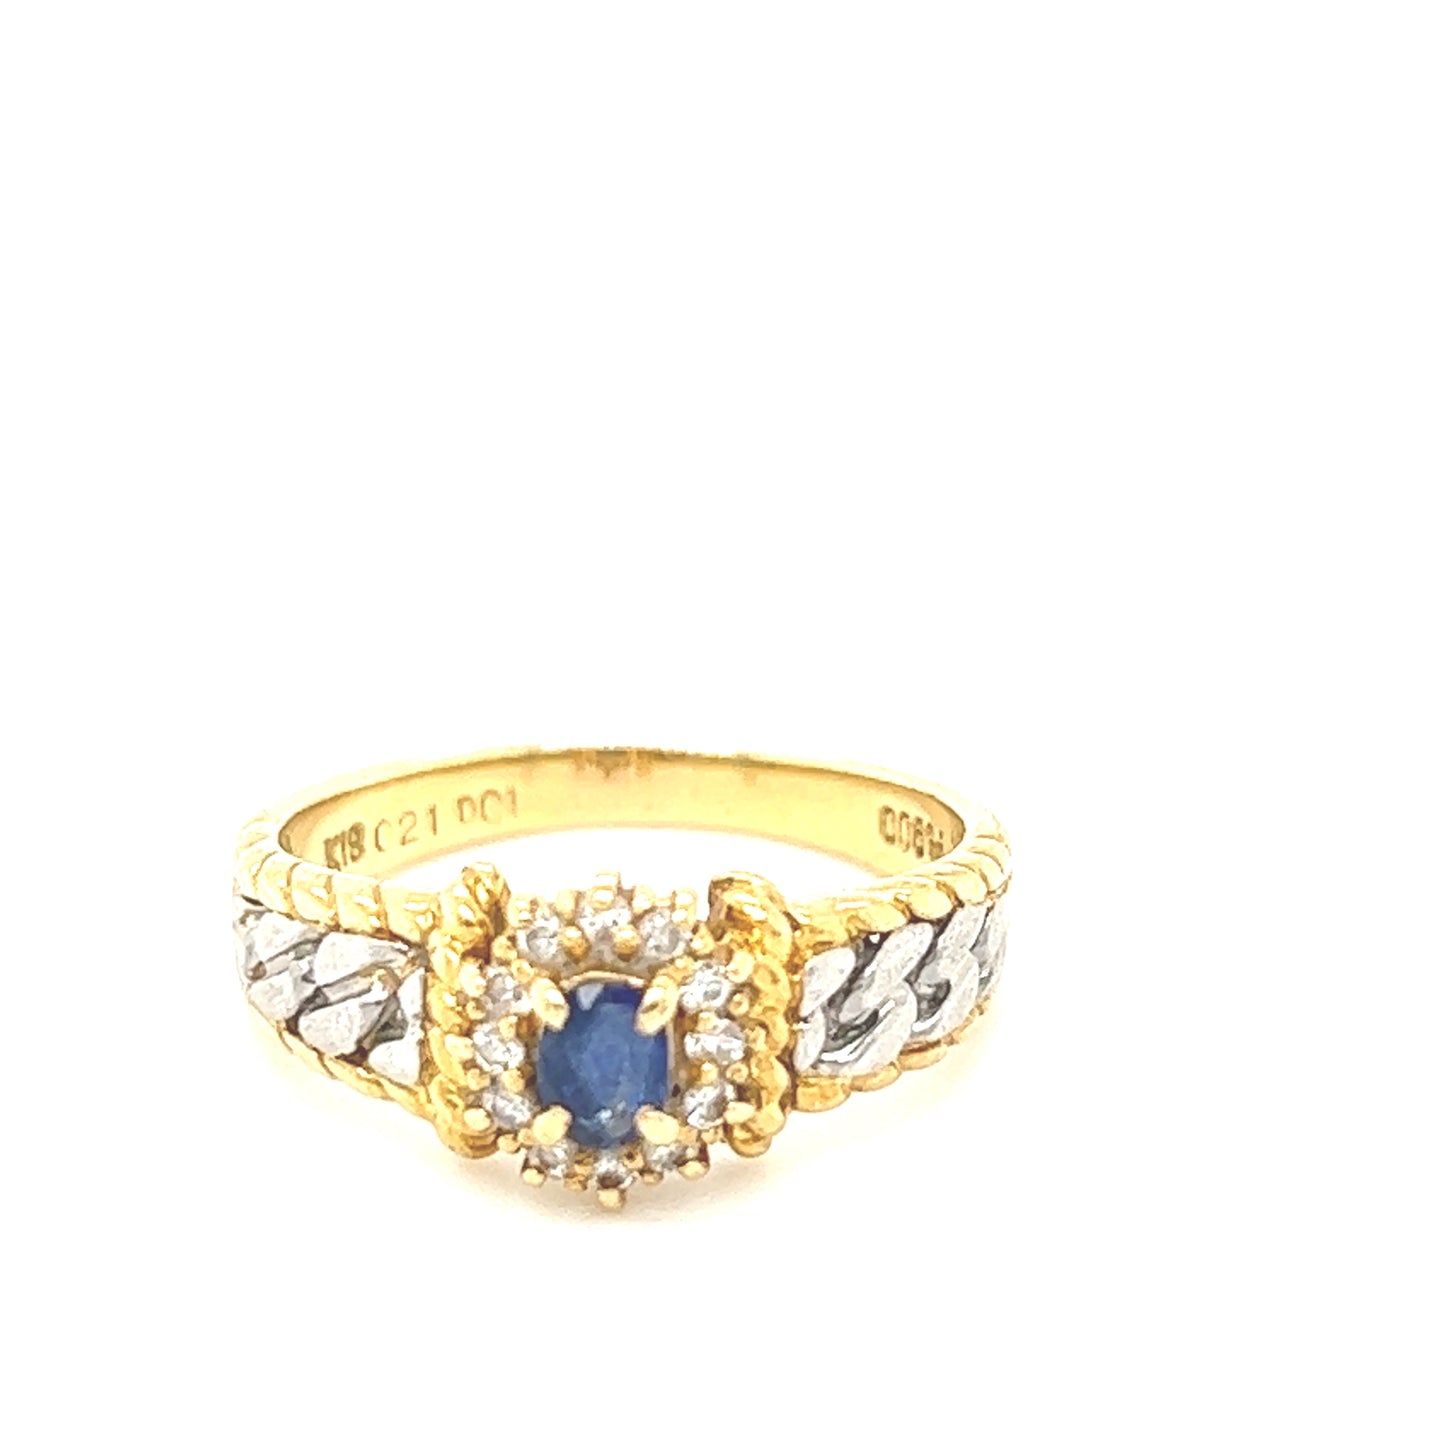 PT900/18K Sapphire ring with Diamond accents